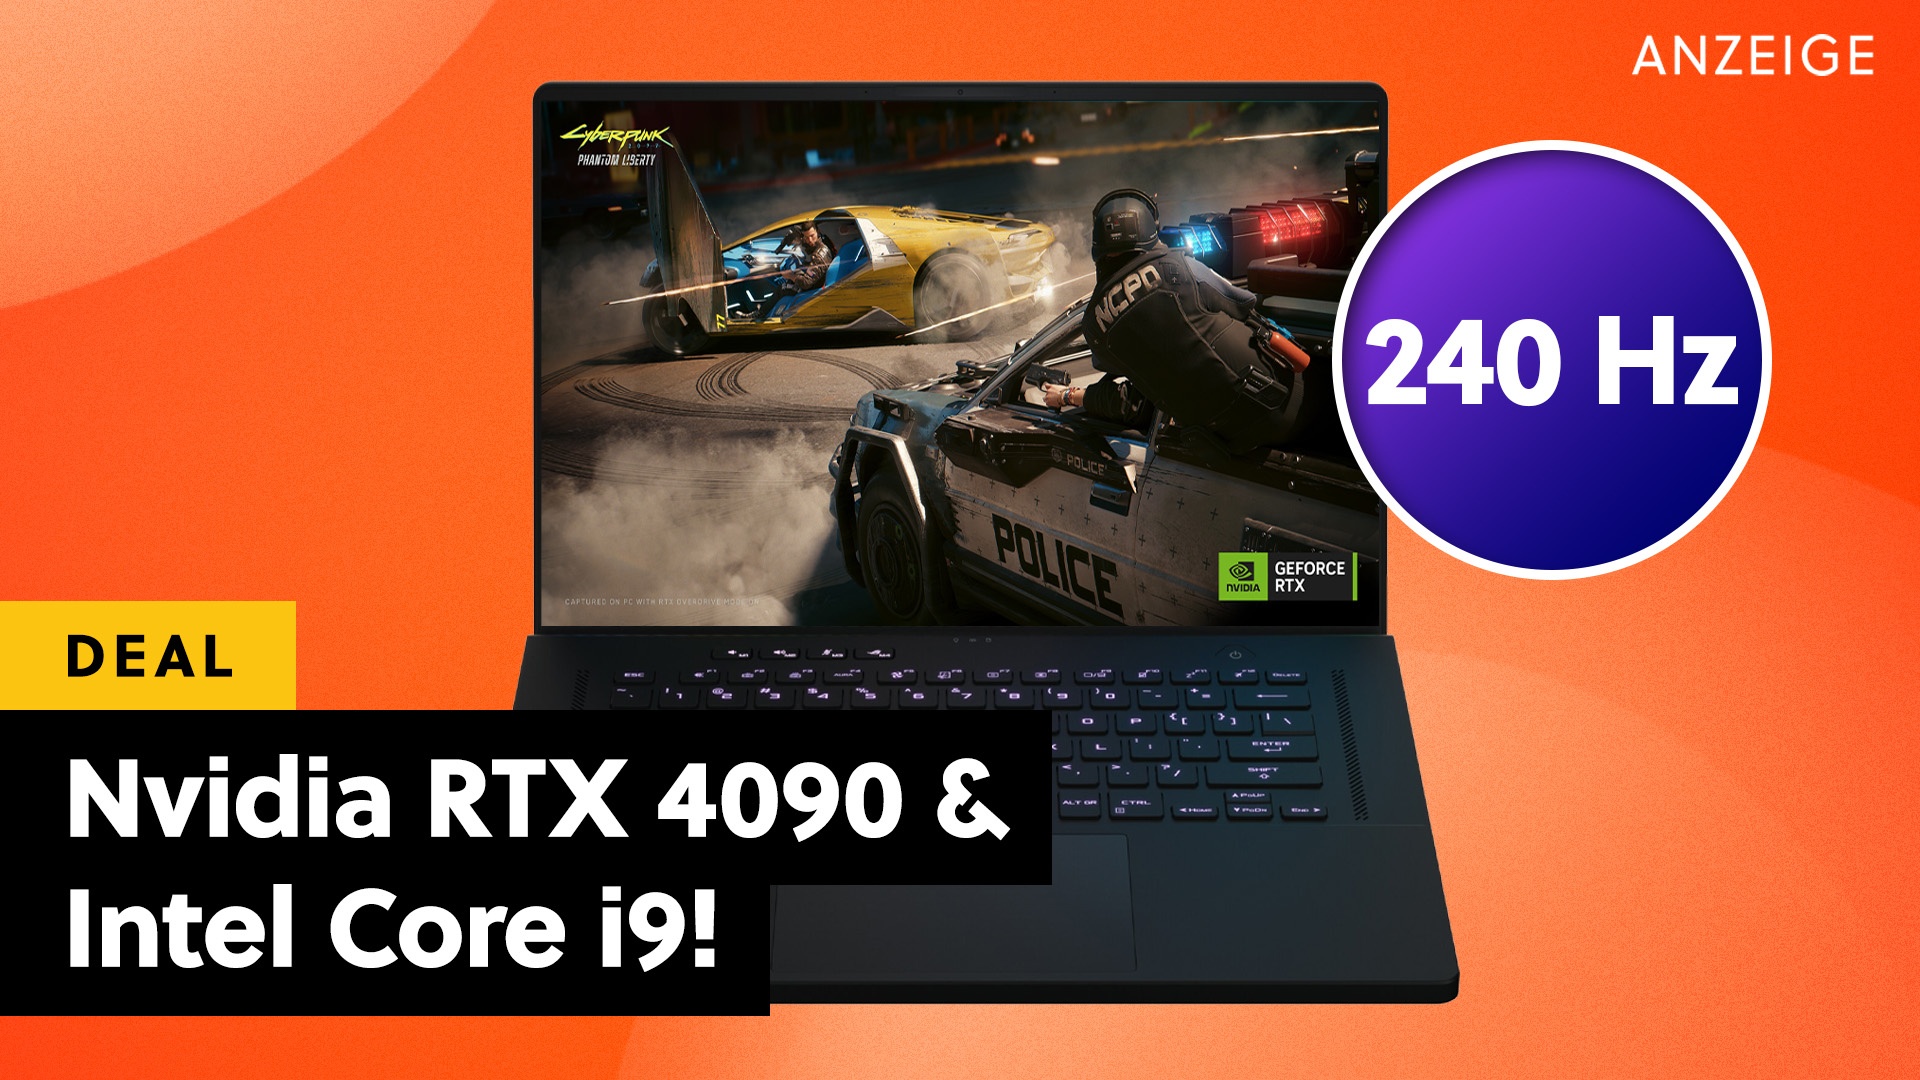 The last boss among gaming laptops is now incredibly cheap with a discount of 600 euros!